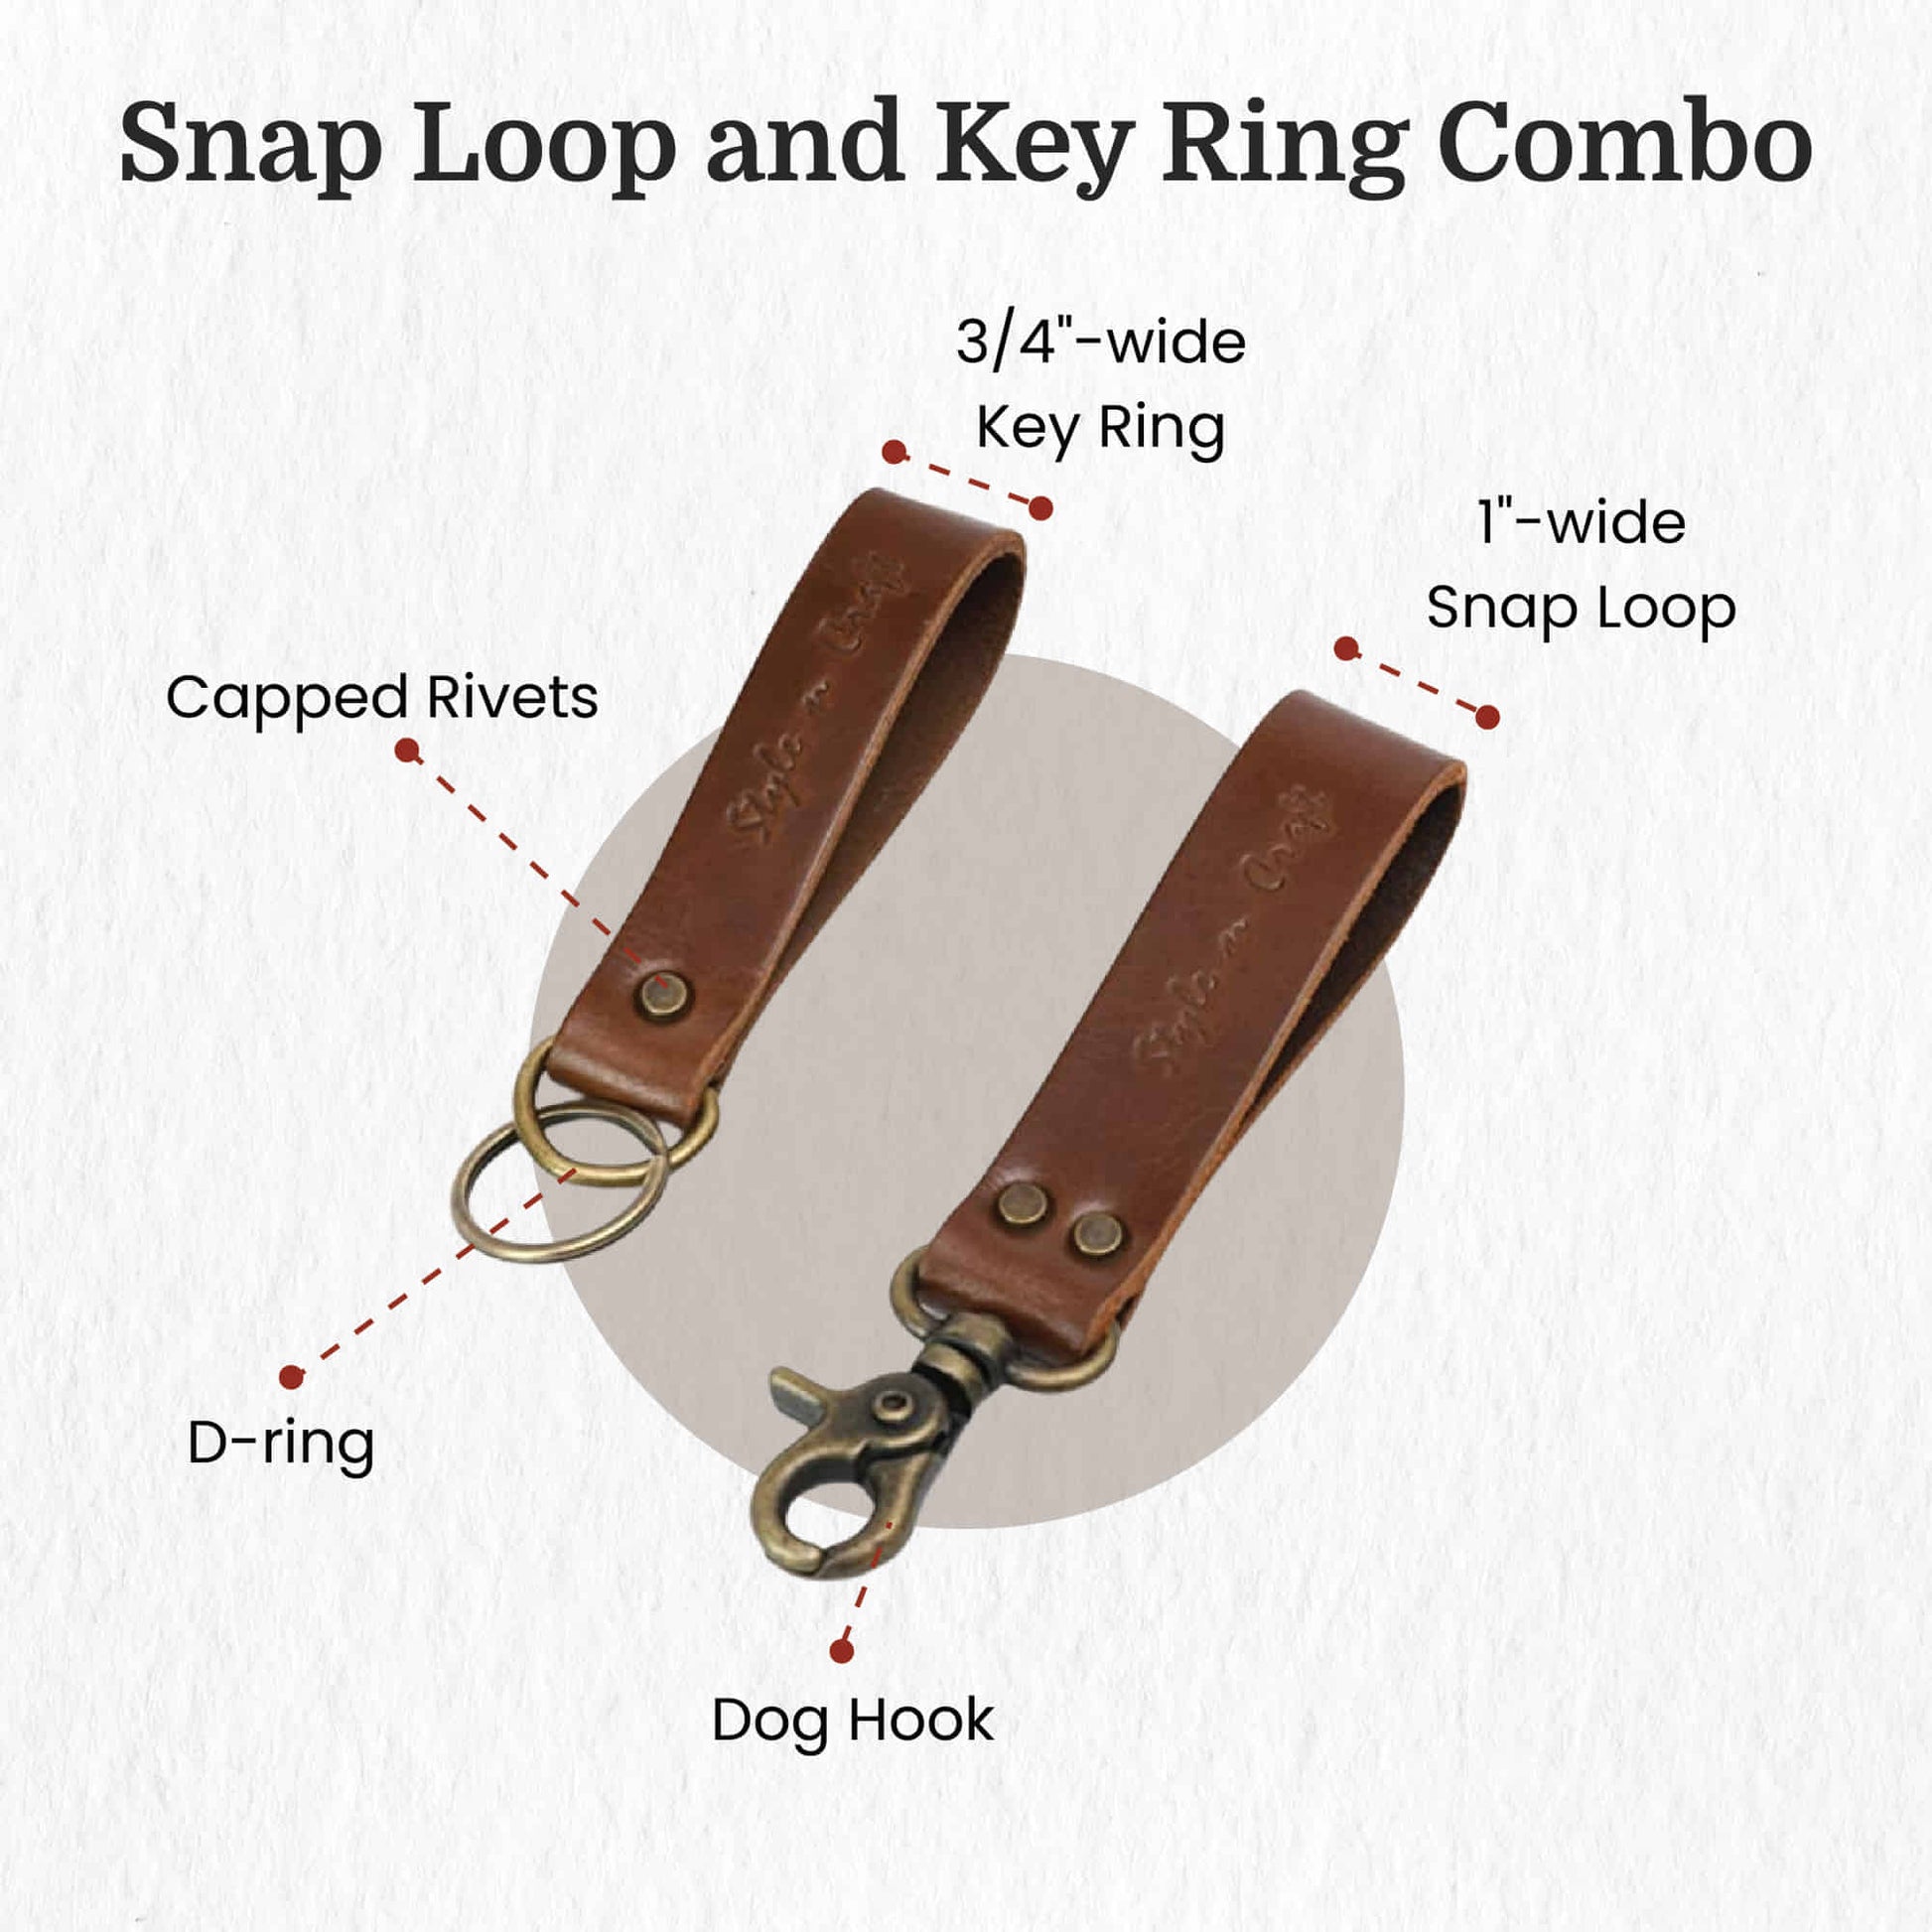 Style n Craft 98203 - Snap Loop & Key Ring Combination in Heavy Top Grain Leather in Dark Tan Color. Both Can Easily Slide on a 2 Inch Wide Belt. Front Angled View Showing the Details.